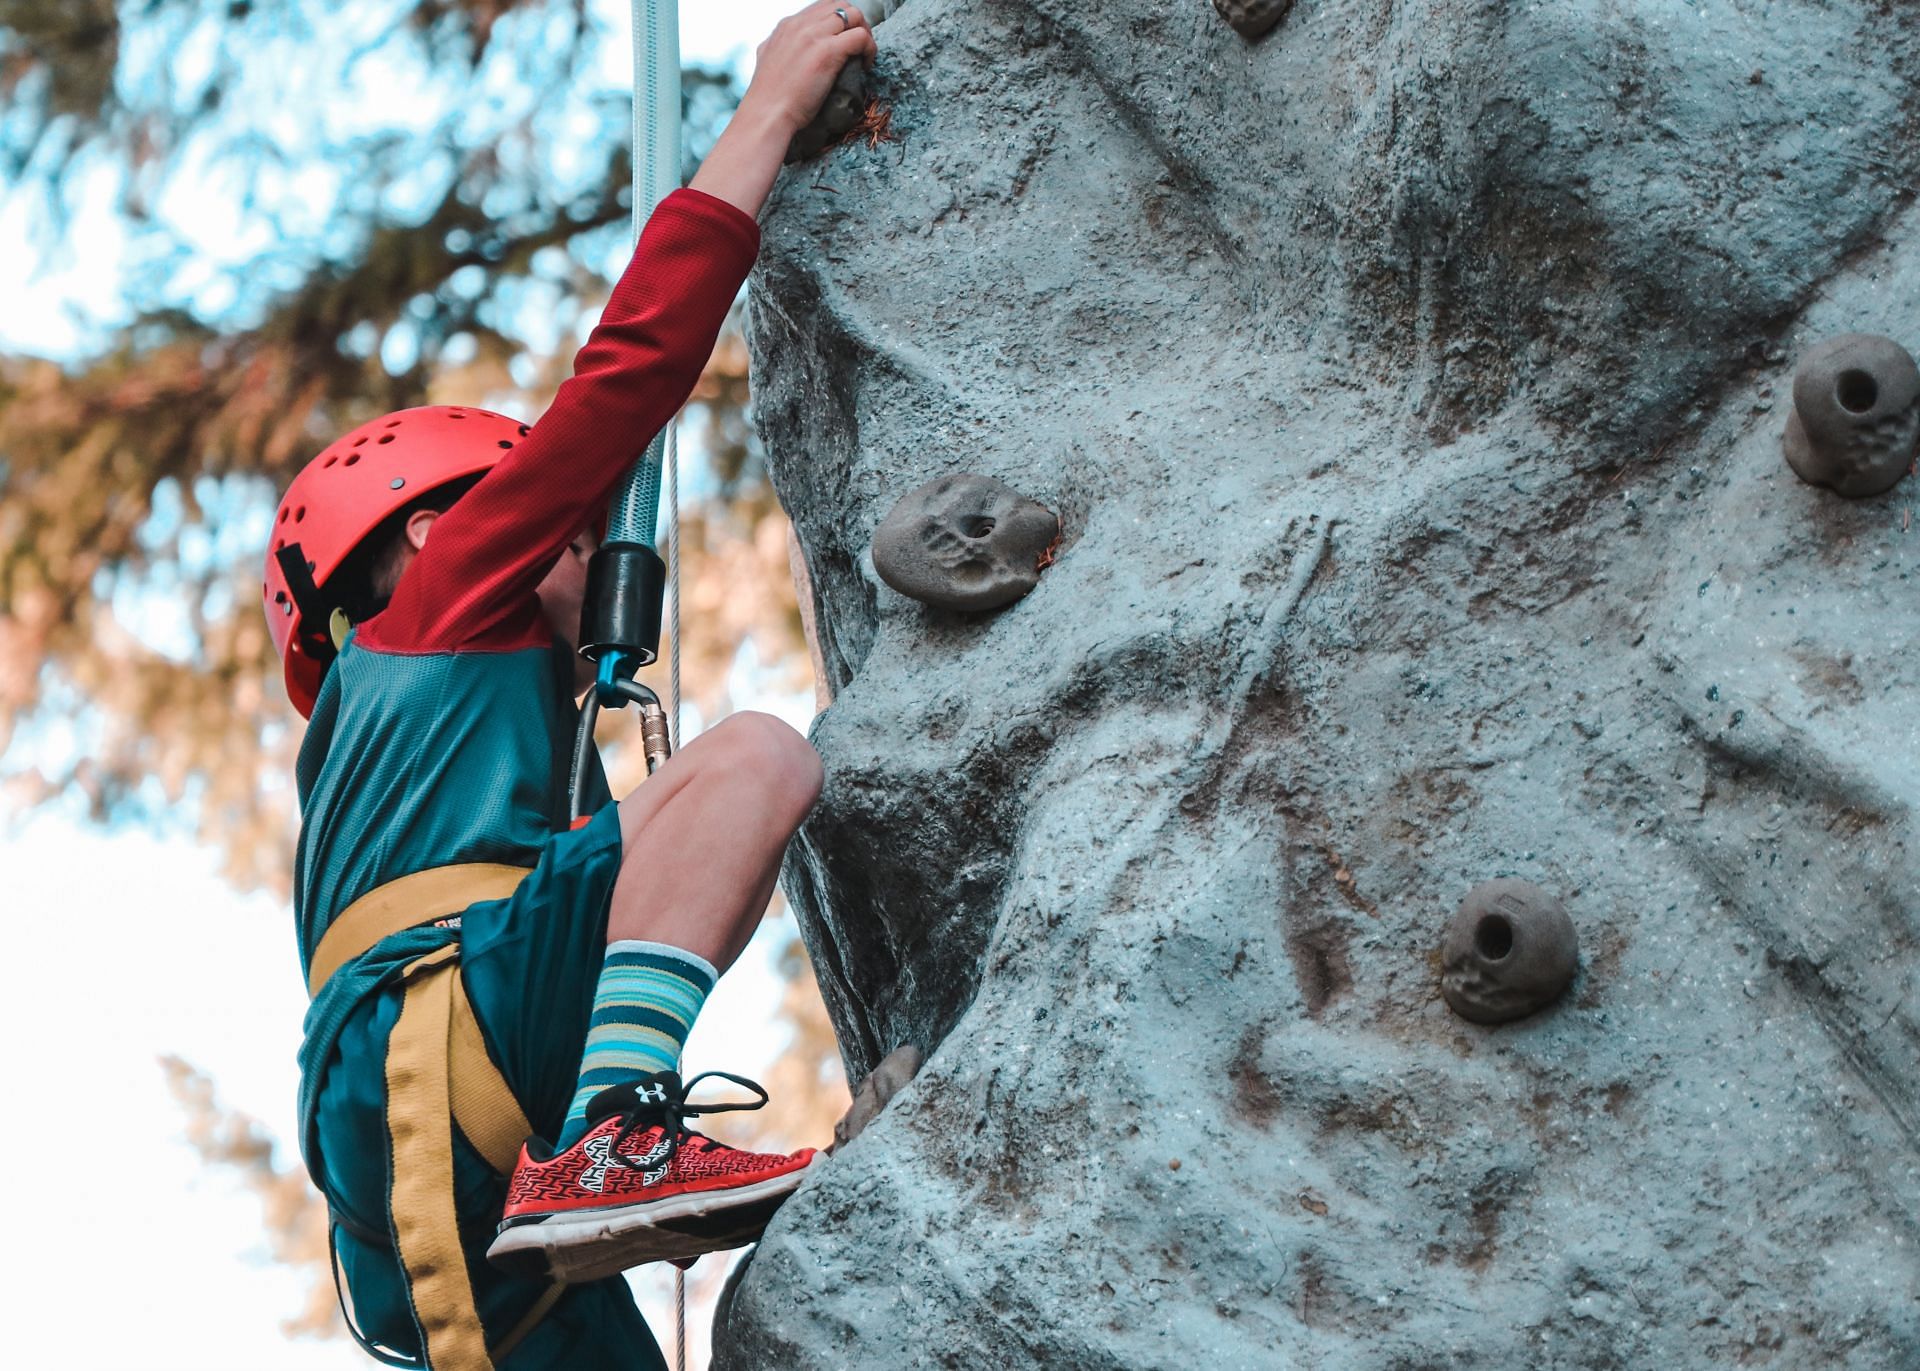 Importance of rock climbing (image sourced via Pexels / Photo by davyd)